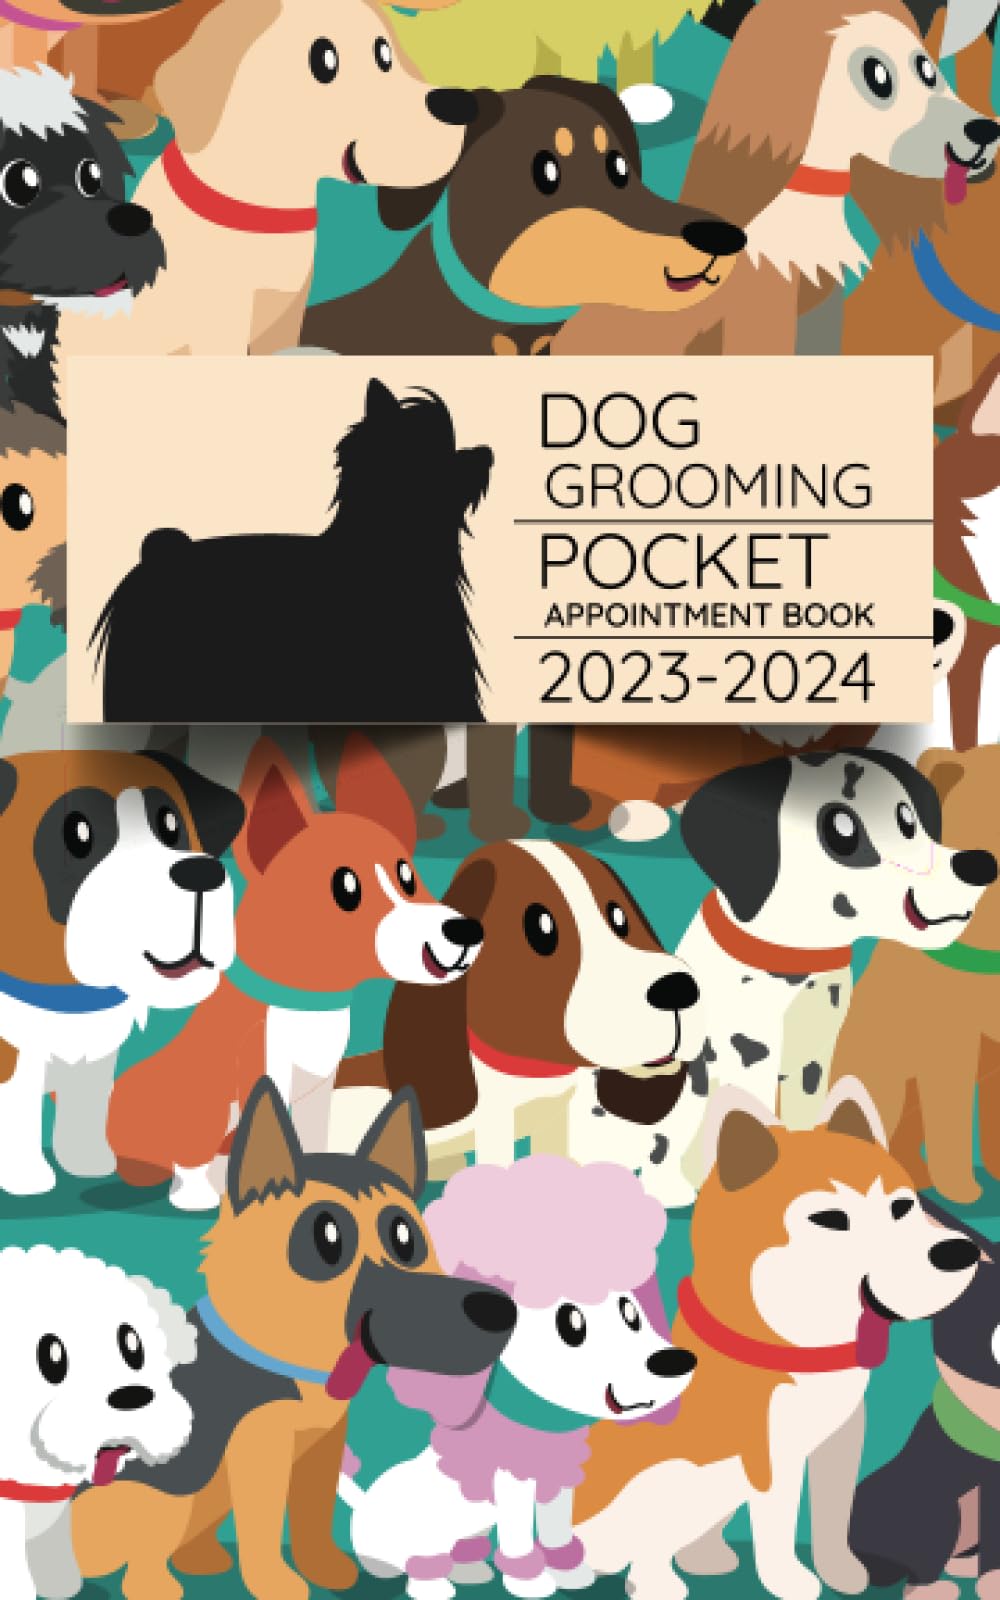 Dog Grooming Pocket Appointment Book 2023-2024: 2-Year Weekly, and Daily Planner, Appointments with Date from 8 a.m. to 10 p.m. with 30 minutes slots for Pet Groomer, Pocket Size